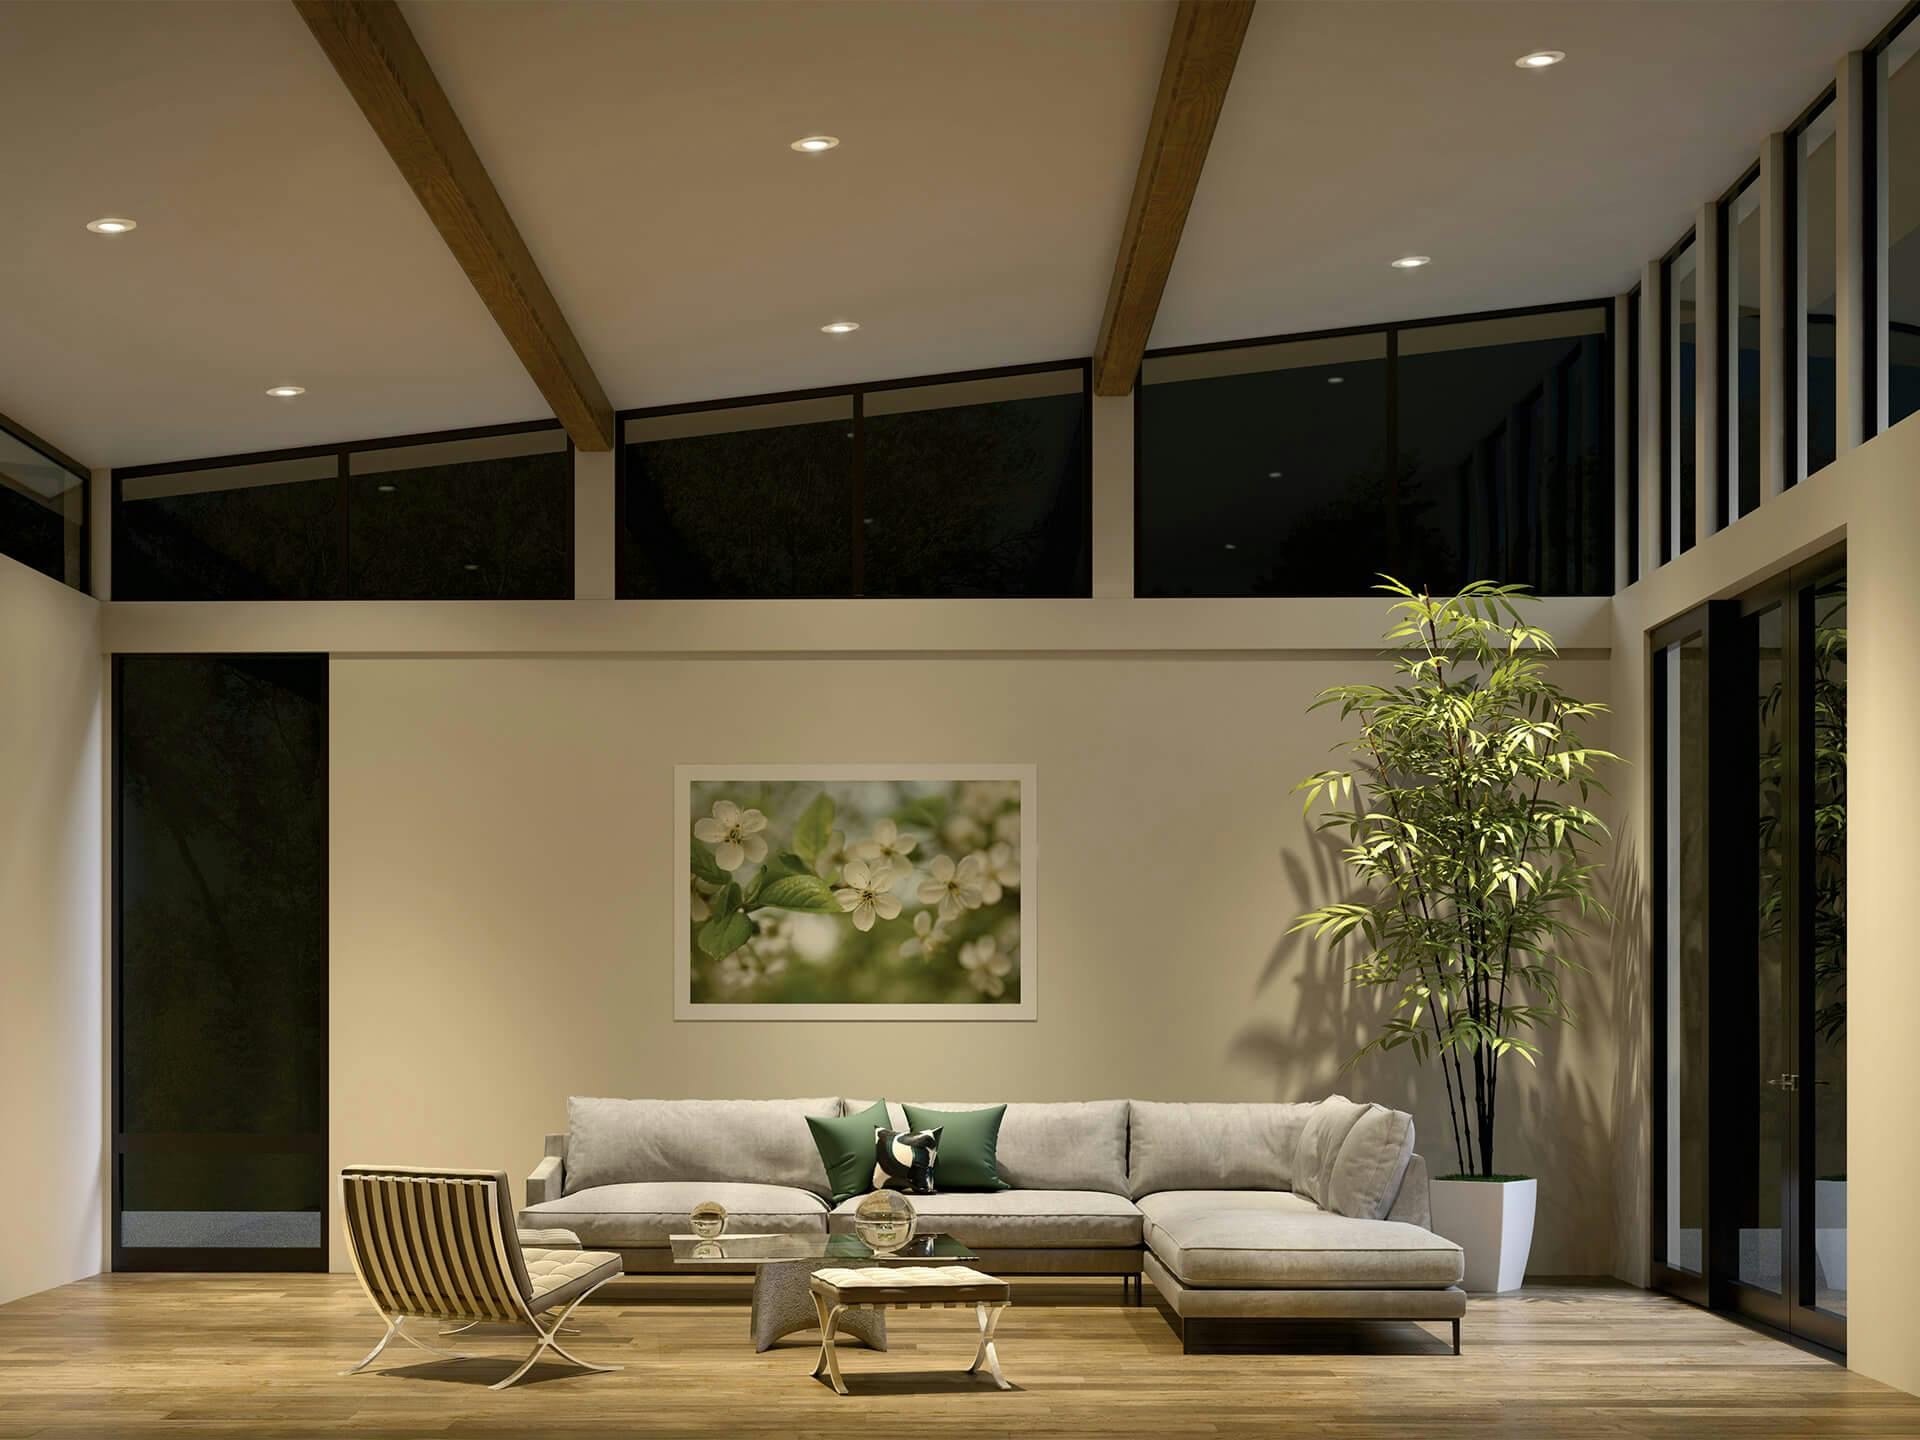 Living room featuring a high ceiling lit with DTC lights